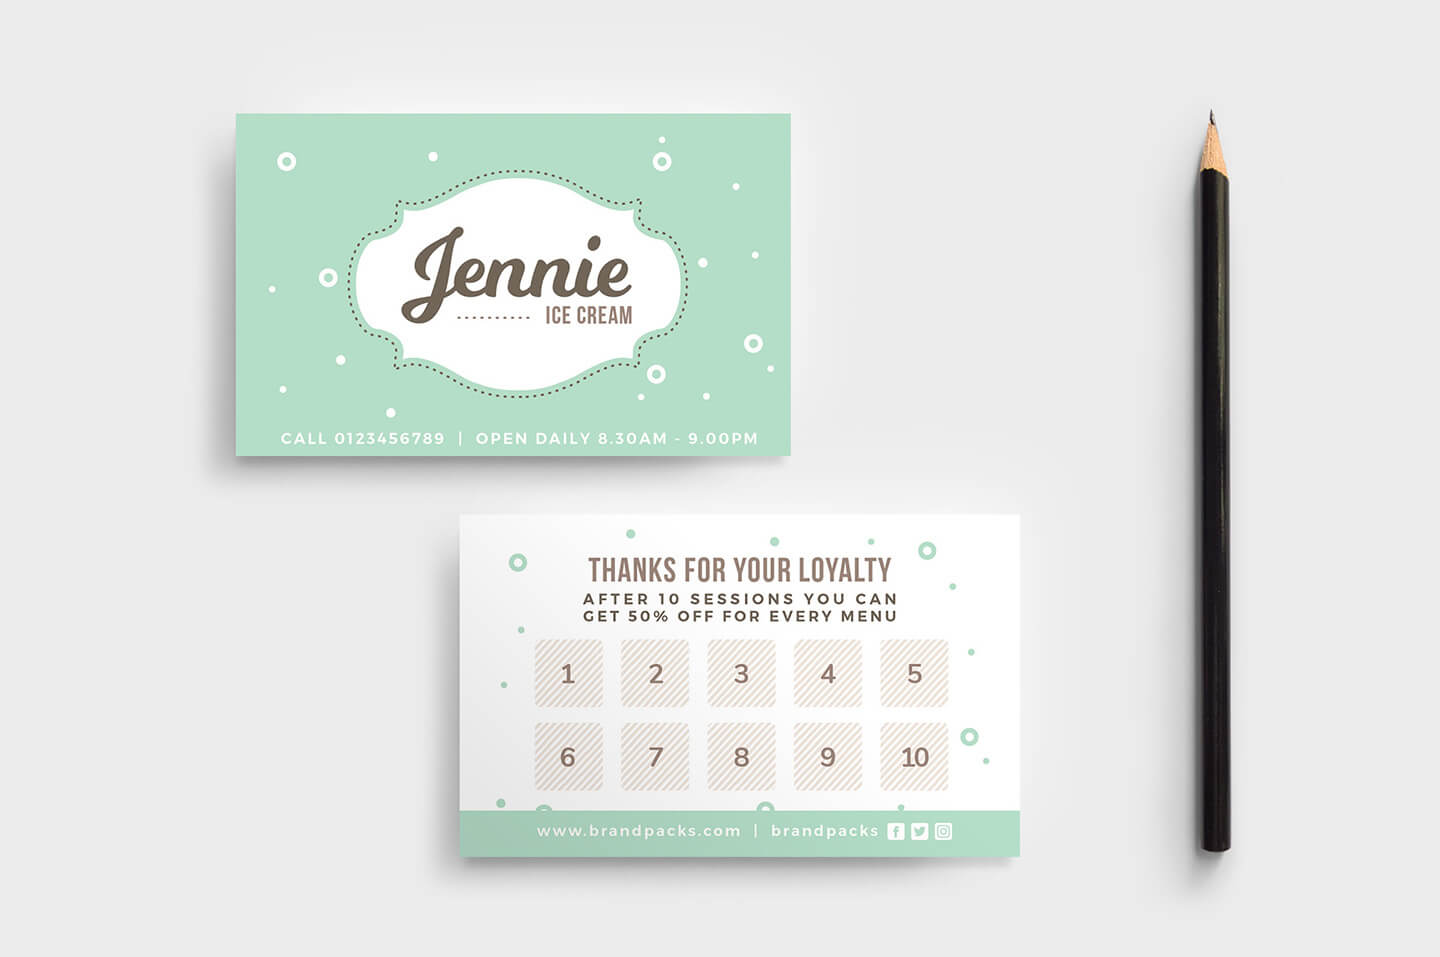 Free Loyalty Card Templates - Psd, Ai & Vector - Brandpacks Within Loyalty Card Design Template